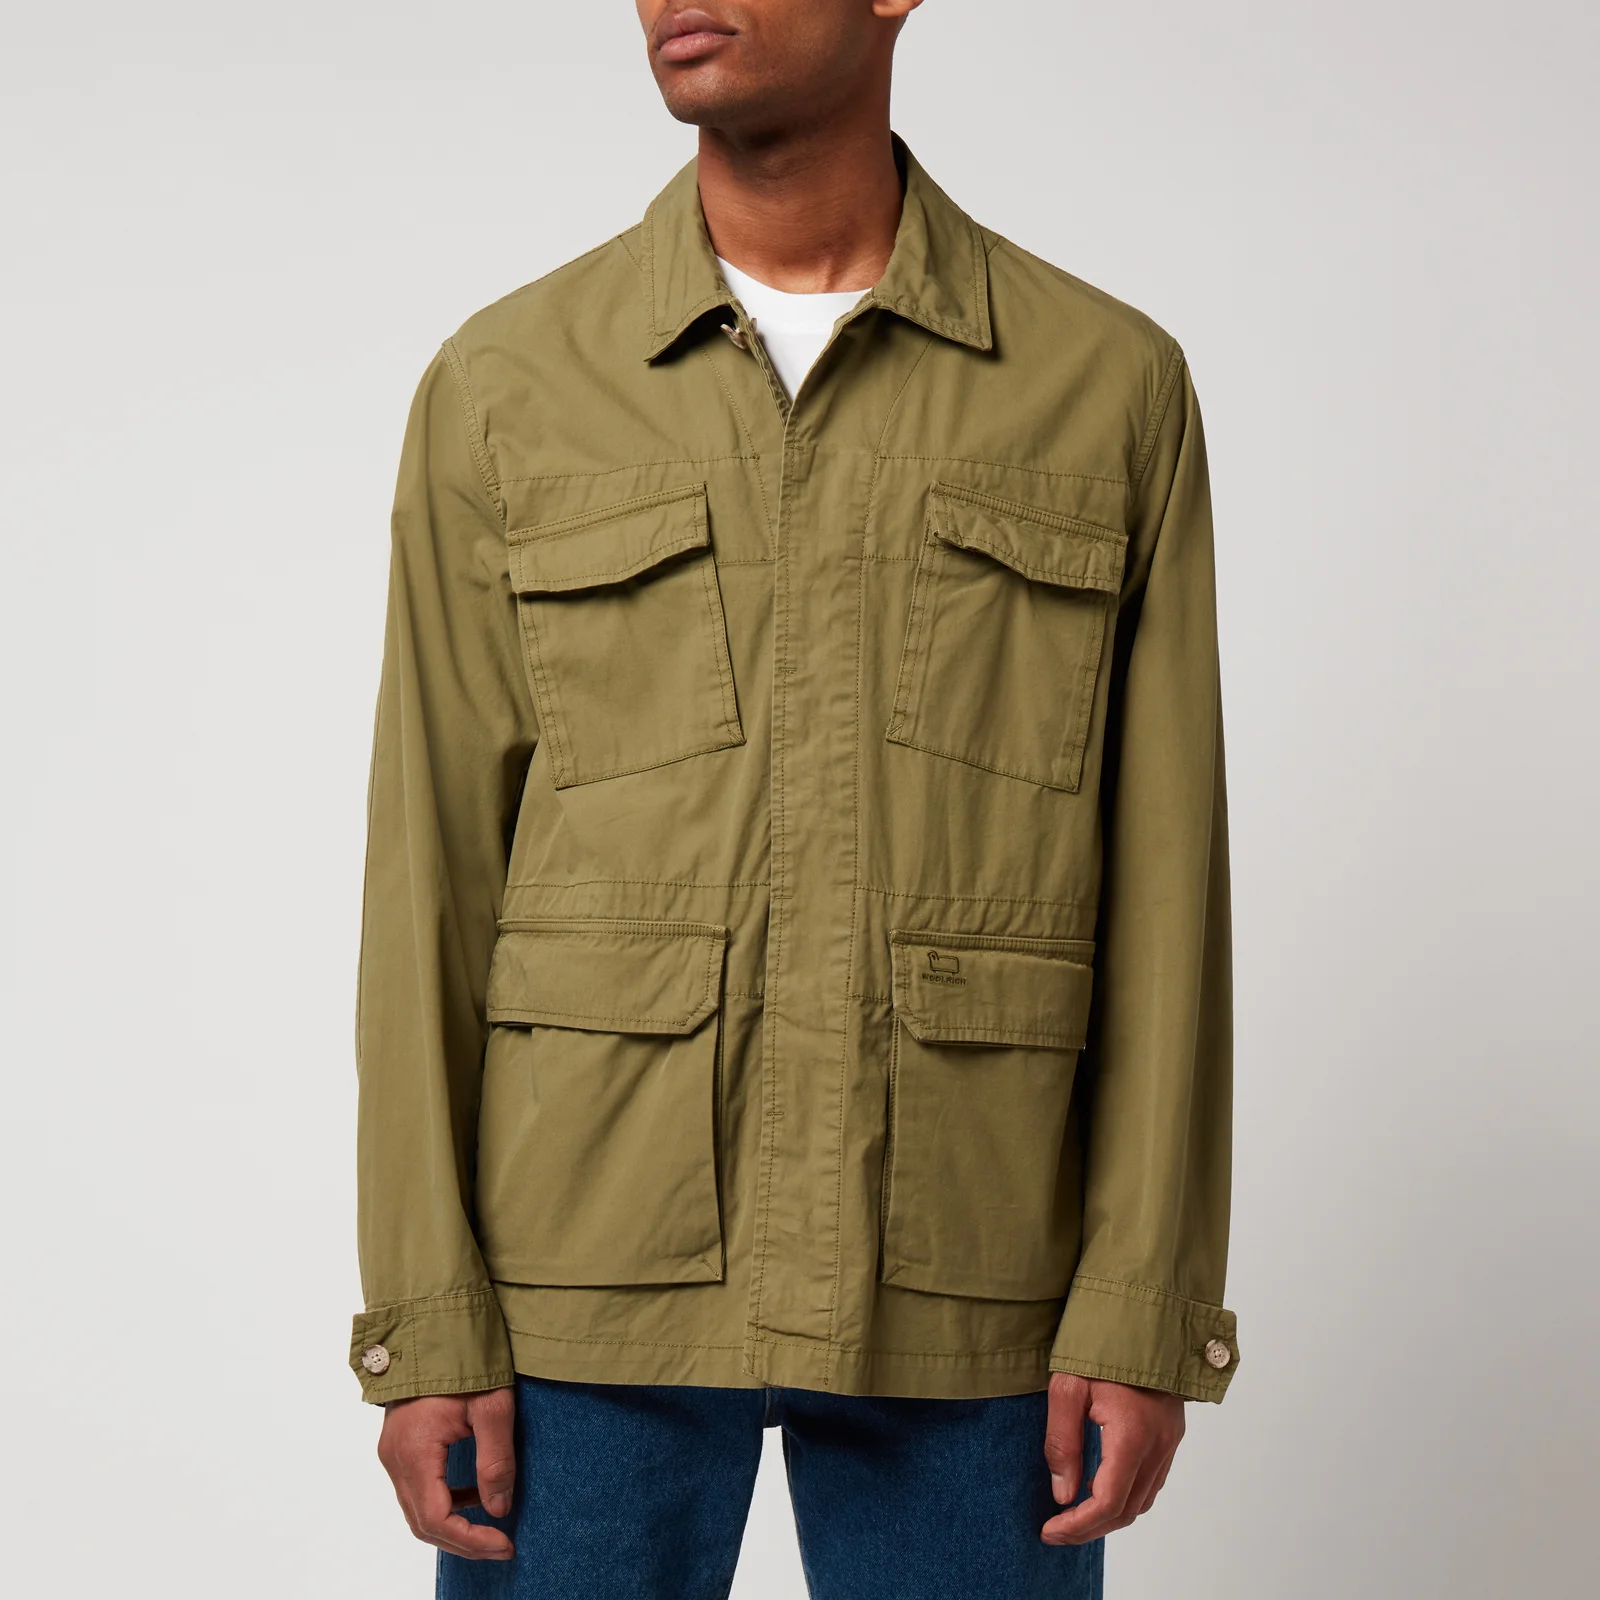 Woolrich Men's Military Cotton Field Jacket - Ivy Green Image 1